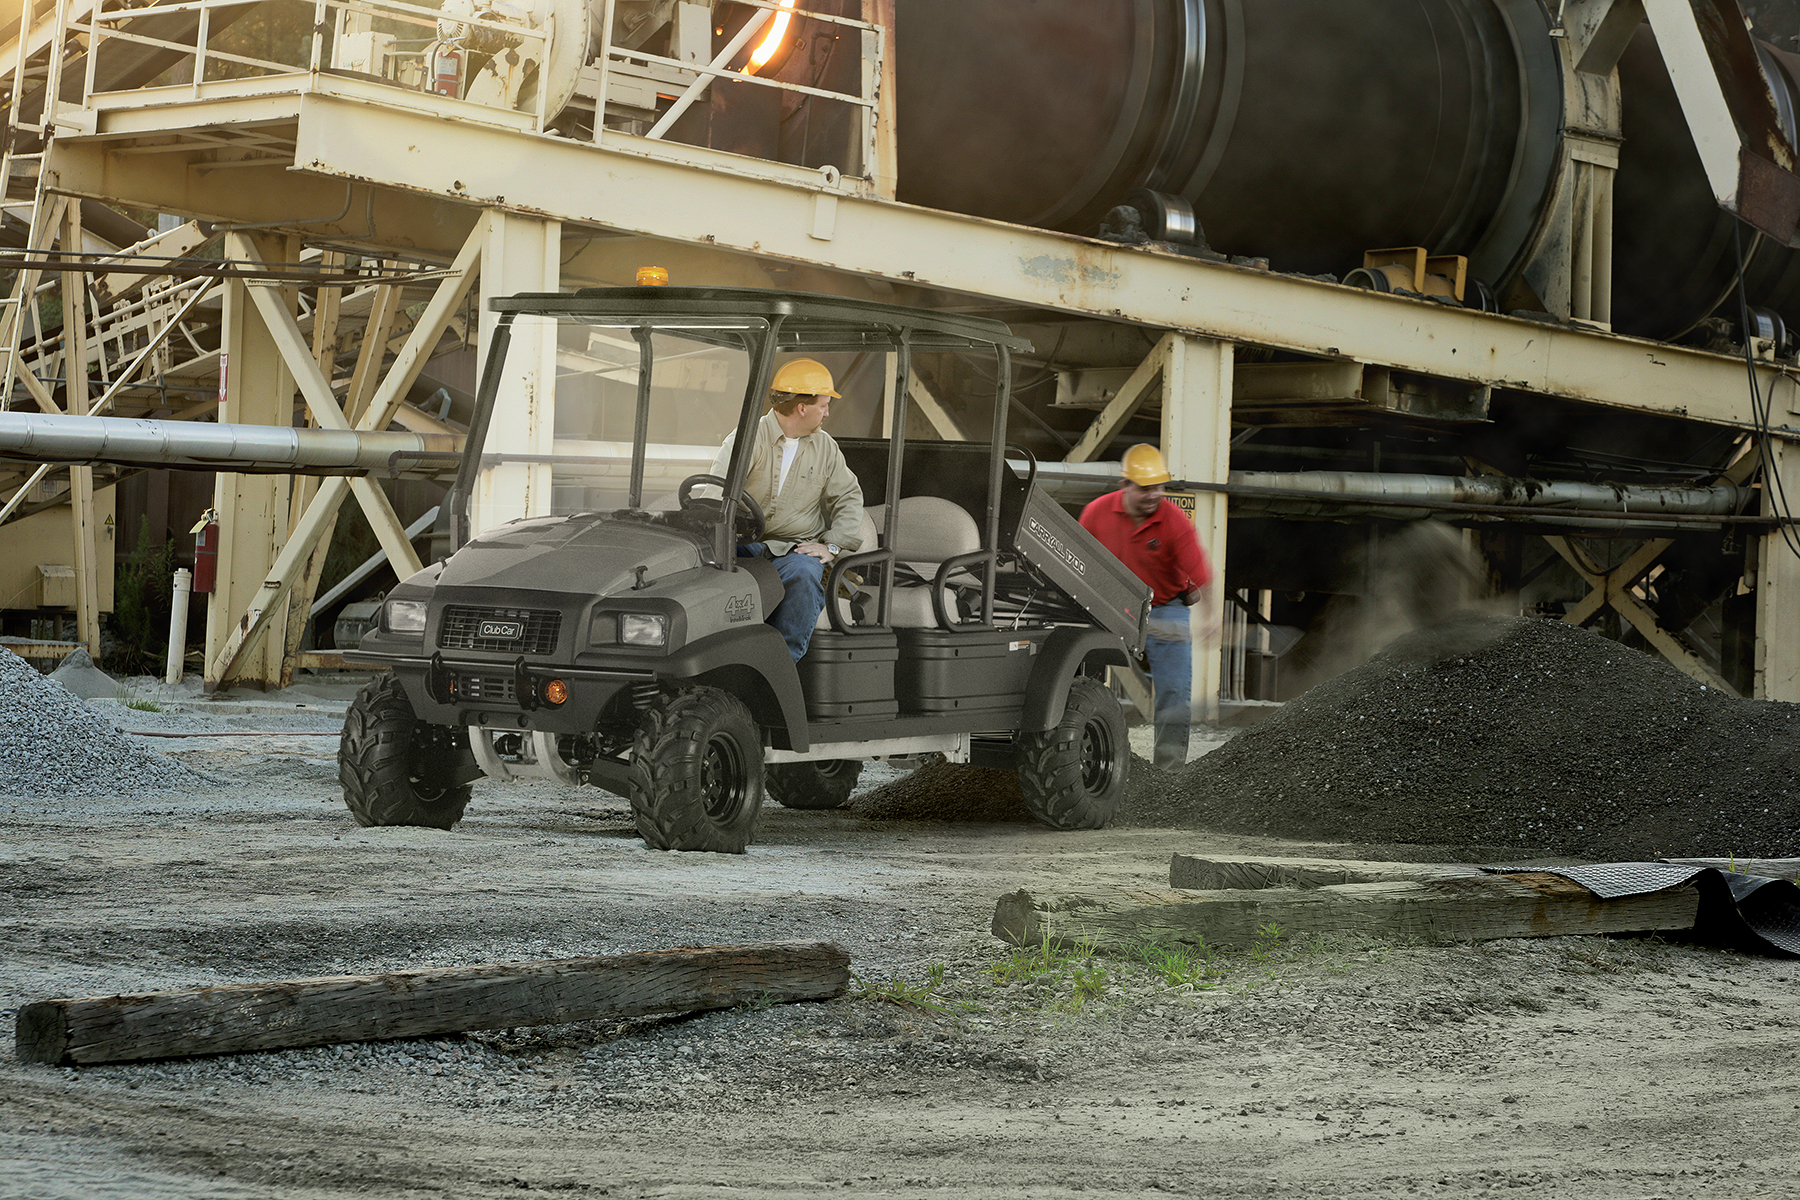 Both the Carryall 1700 and the Carryall 1500 utility vehicles feature the IntelliTrak automatic all-wheel drive system that senses the ground it's on and shifts automatically.